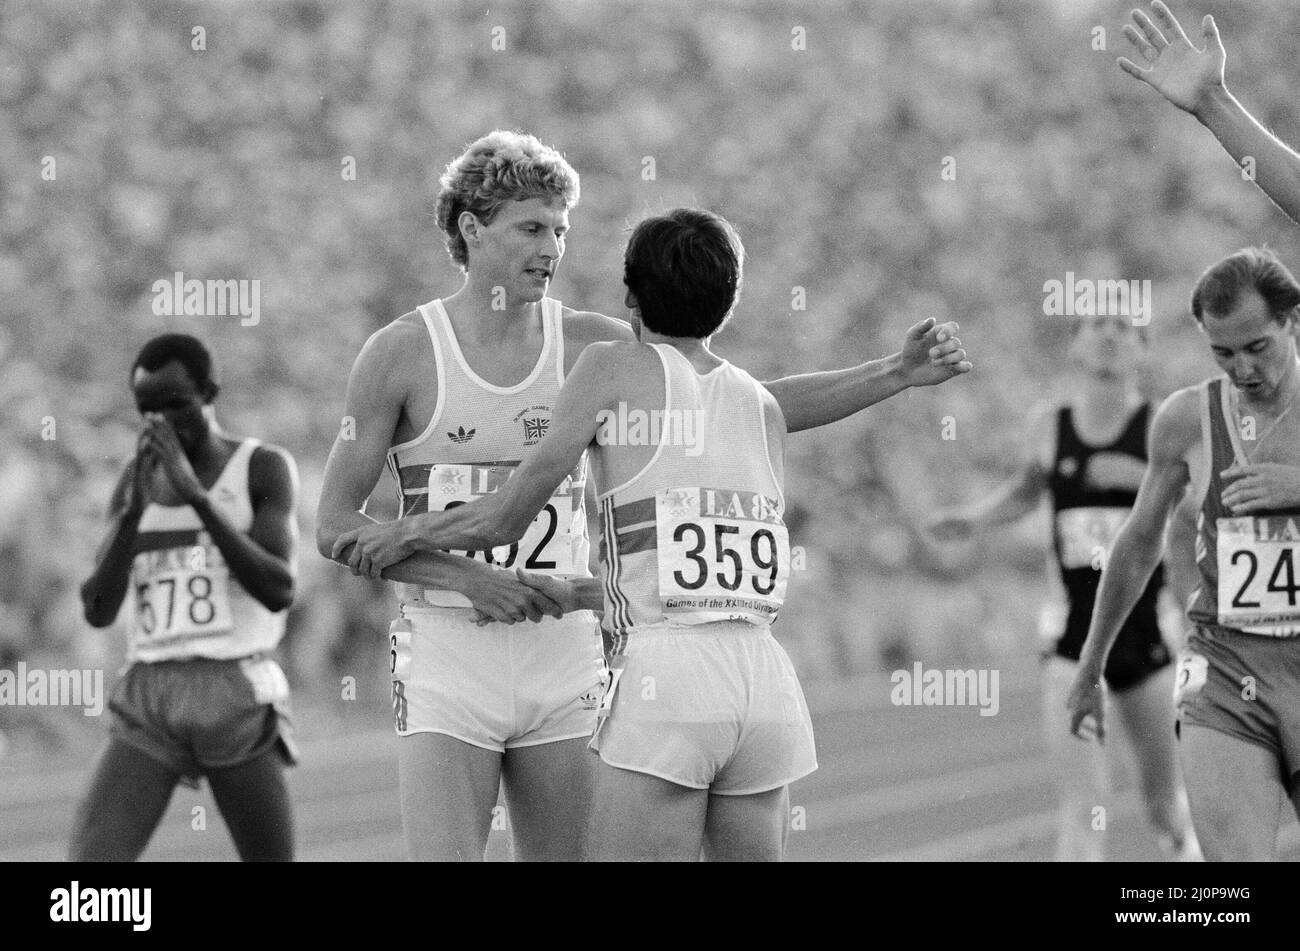 1984 Olympic Games in Los Angeles, USA. Mens Athletics. Great Britain's Sebastain Coe wins the 1500 metres gold medal congratulated by fellow Brit Steve Cram who took silver. 11th August 1984. Stock Photo